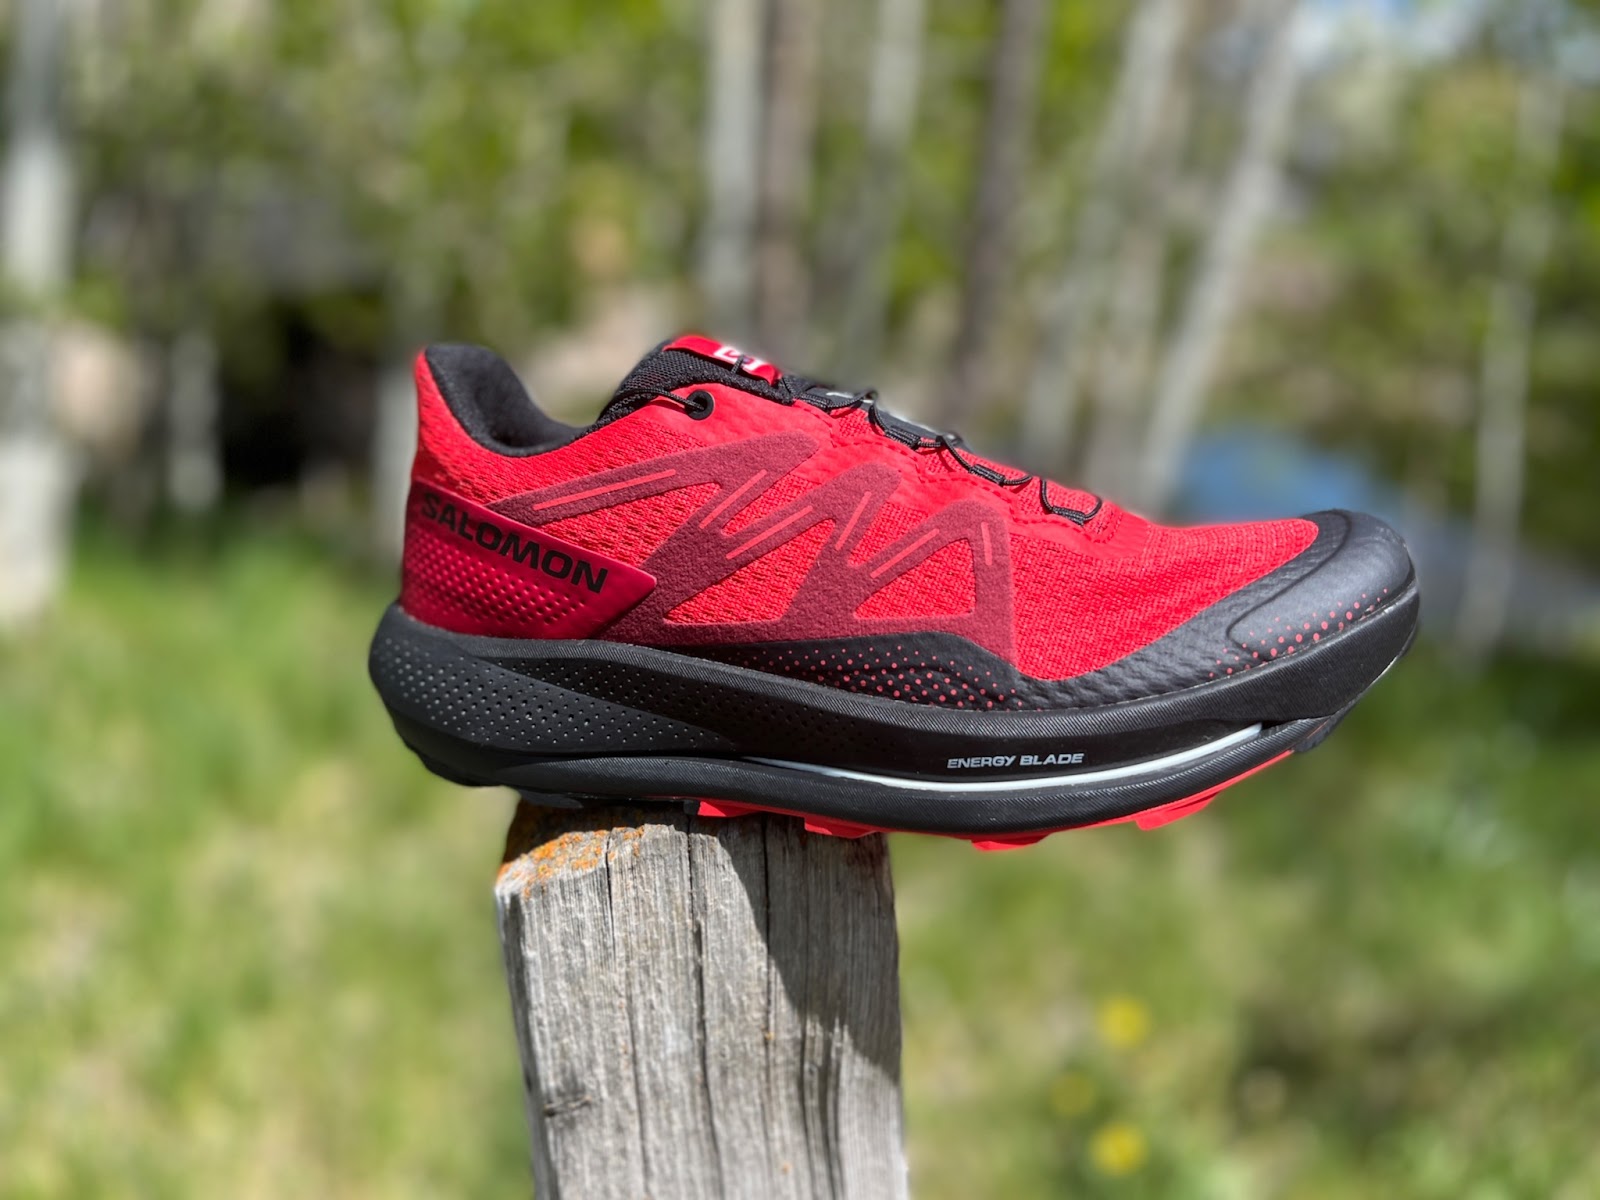 Sammenligne tunnel Postbud Road Trail Run: Salomon Pulsar Trail Review: The New Salomon! Plated,  Protective, Deeply Cushioned, Fun and Versatile.